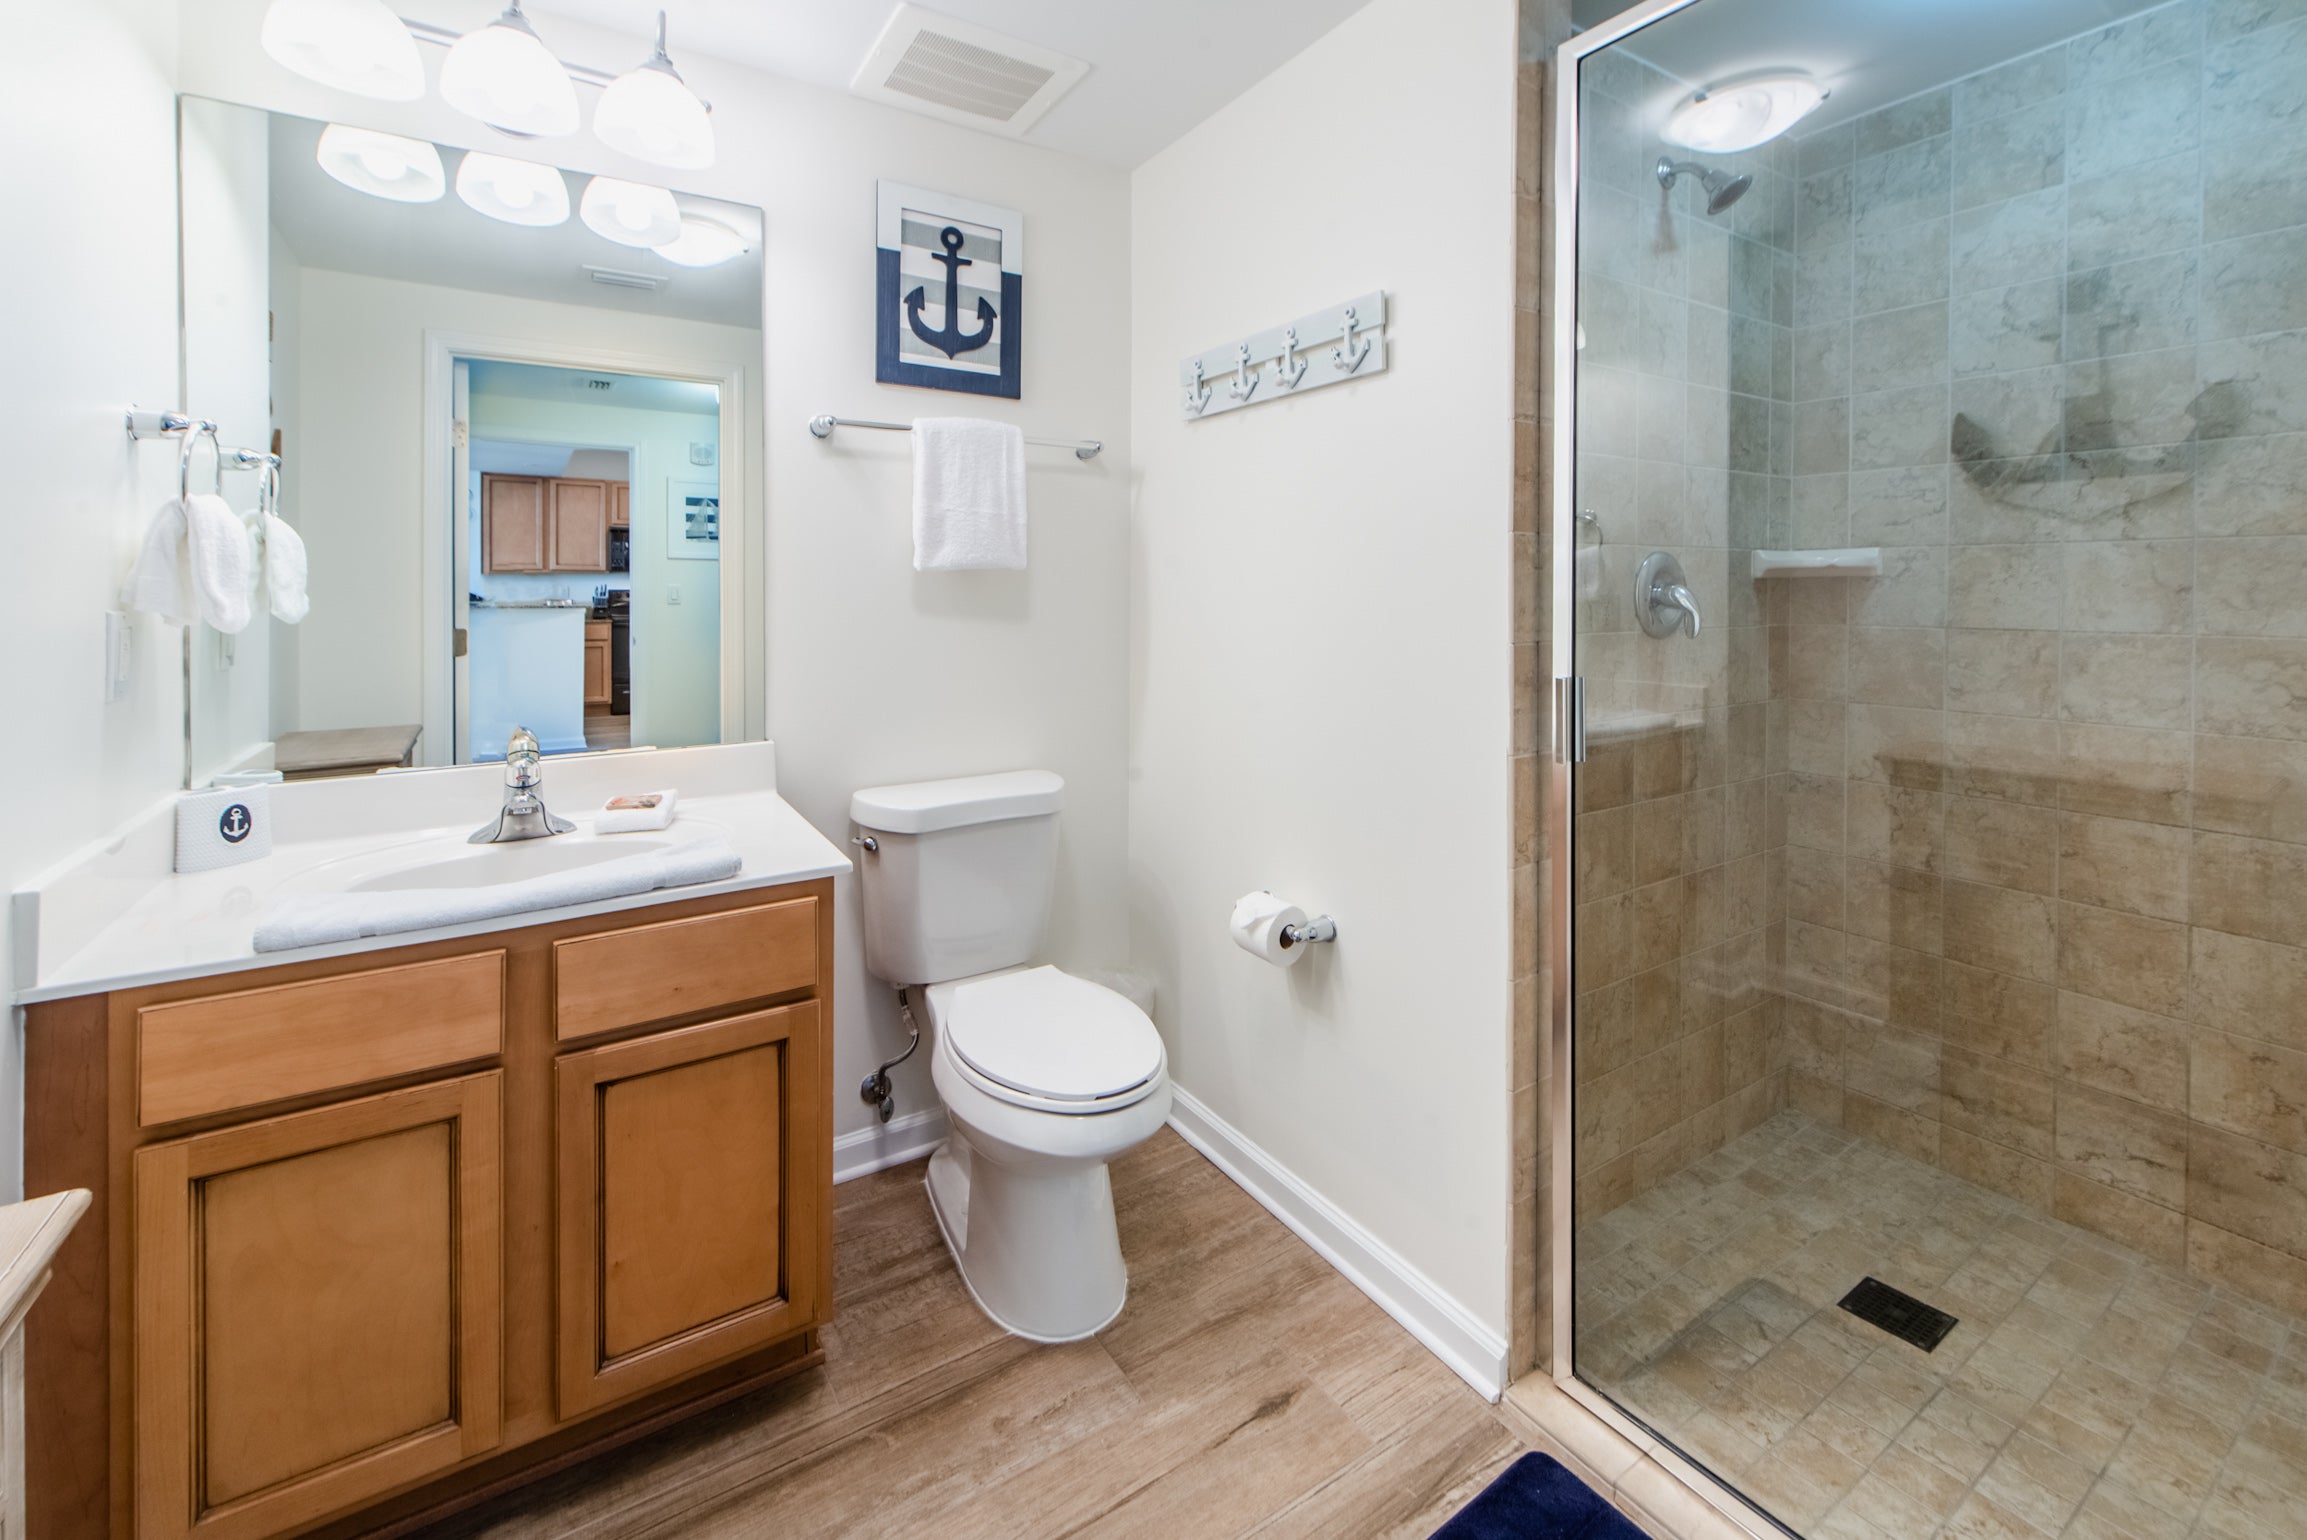 Guest Bath has large tiled Walk-In Shower